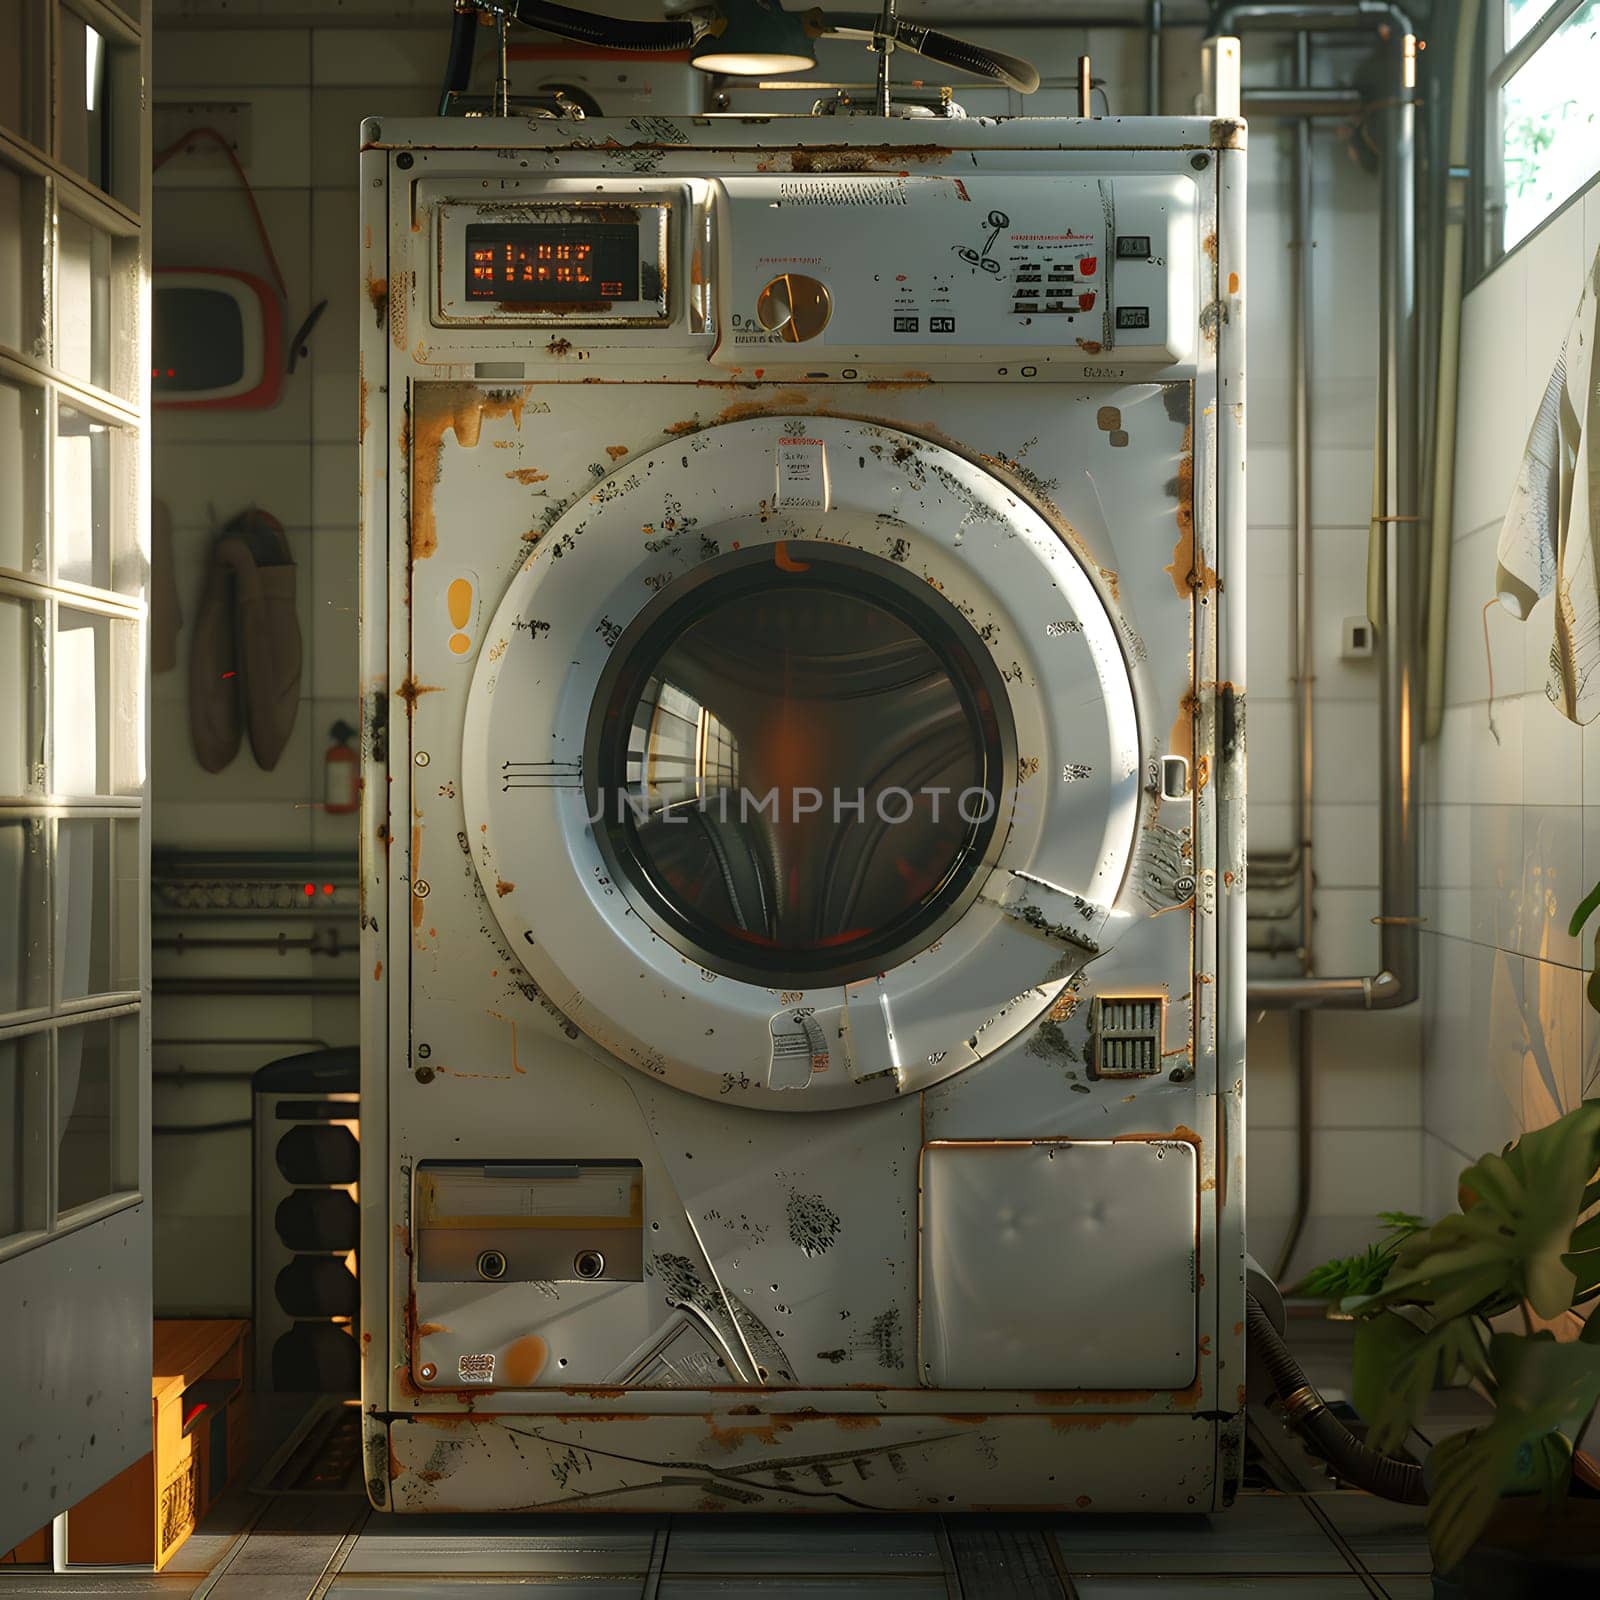 A filthy washing machine, comprised of a steel circle and rectangle, features a digital display reading 1212. It may need maintenance or repair by engineering and plant professionals